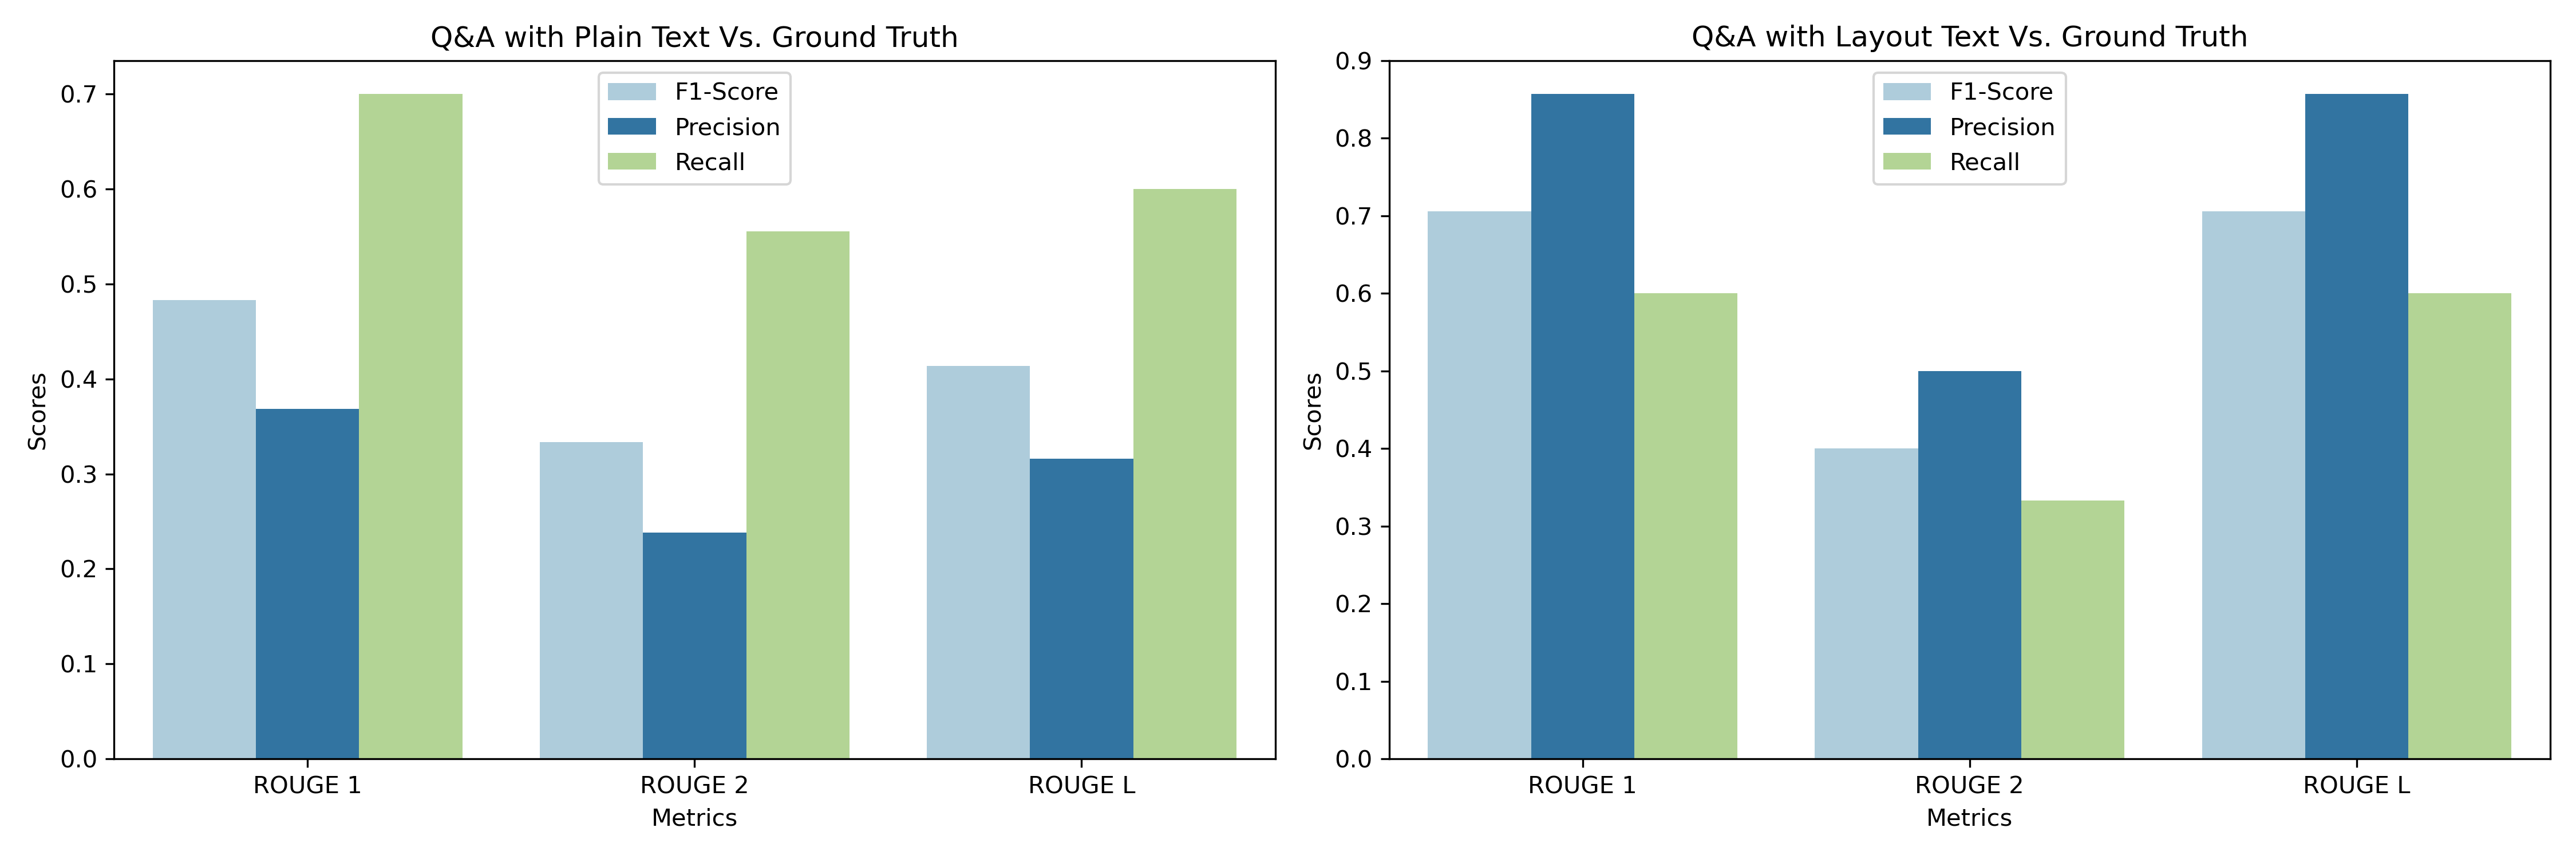 ROUGE plot on Q&A task result with Layout